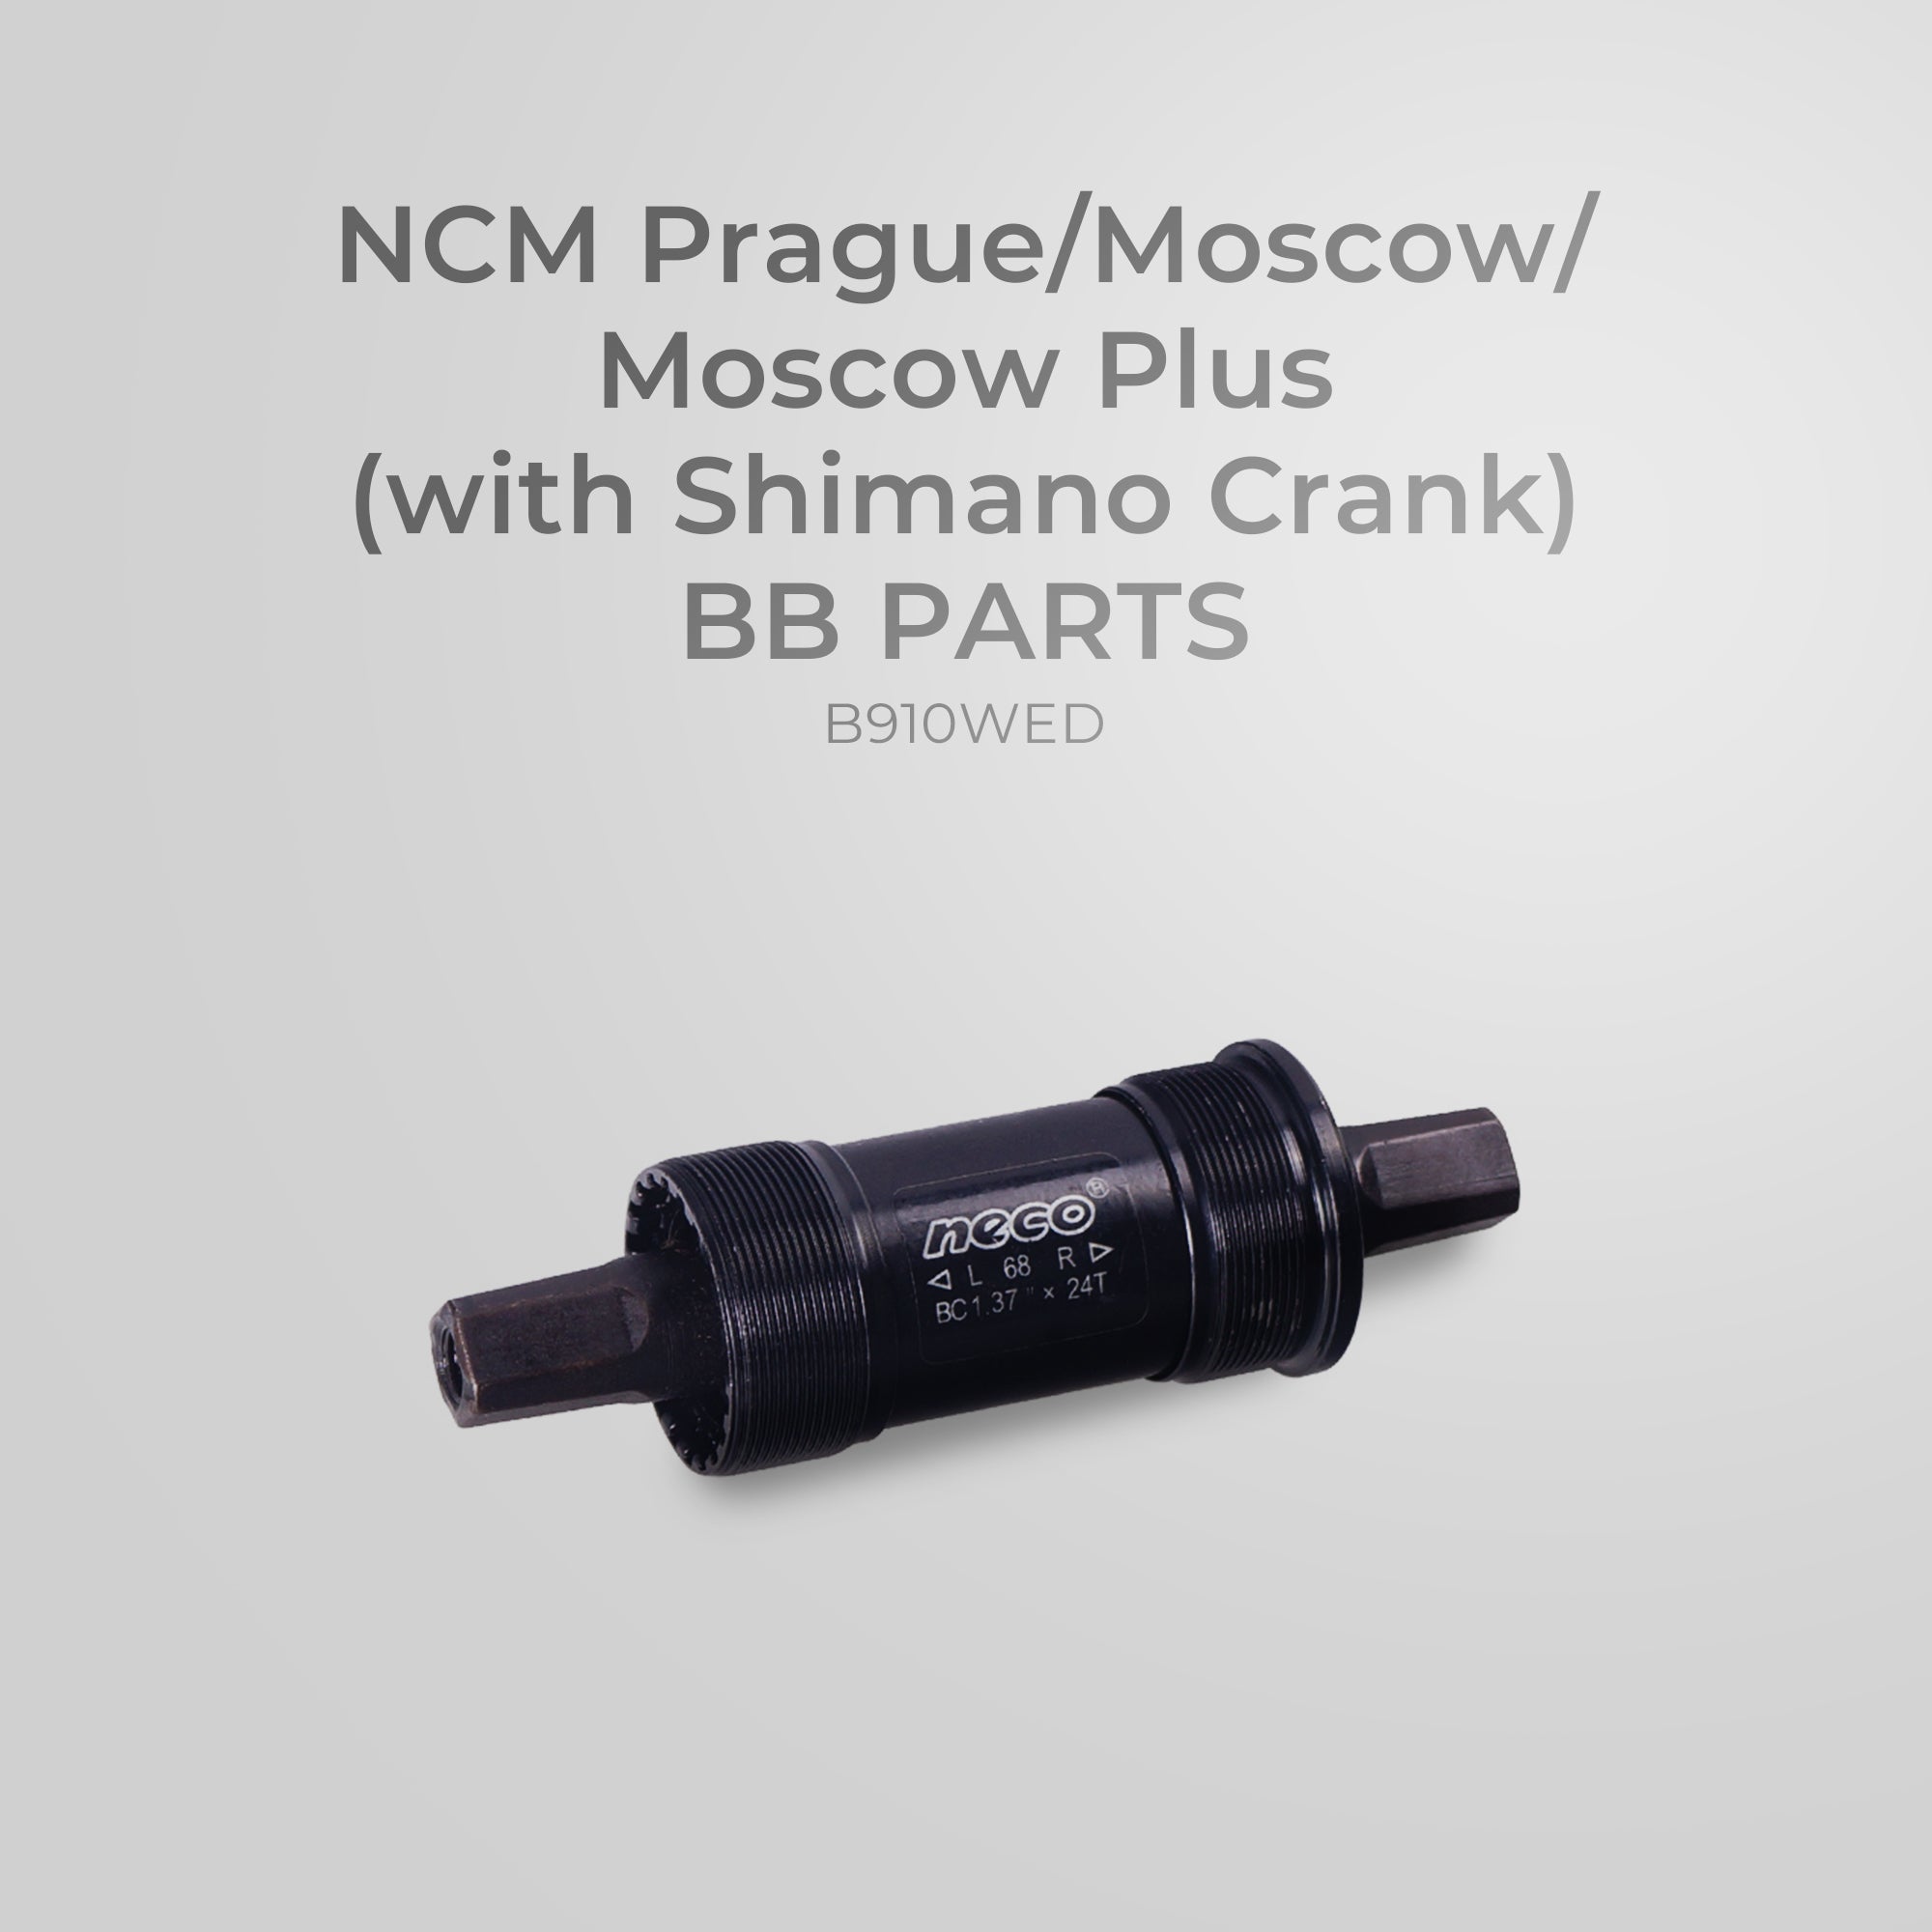 NCM Prague/Moscow/Moscow Plus (with Shimano Crank) BB Parts - B910WED